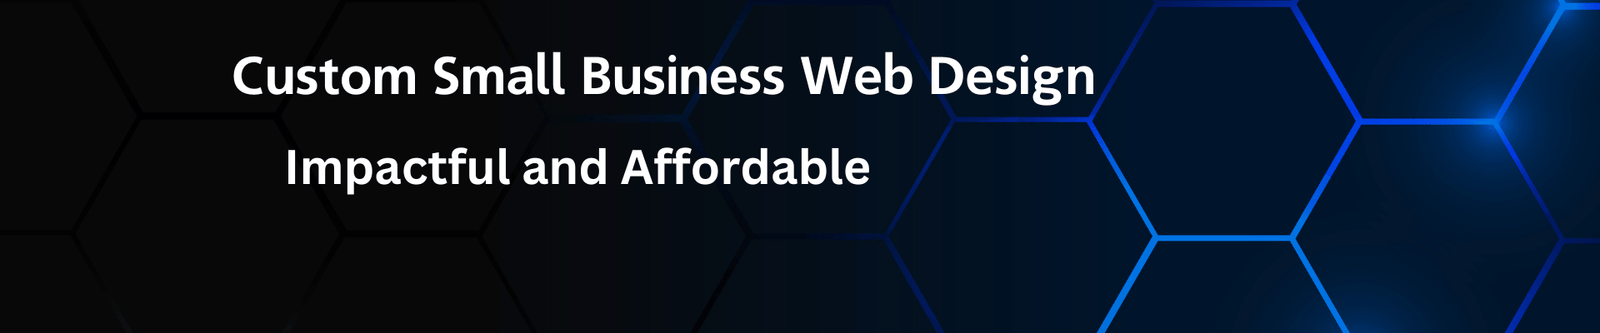 Image: Dark blue background, text: Custom Small Business Web Design, Impactful and Affordable